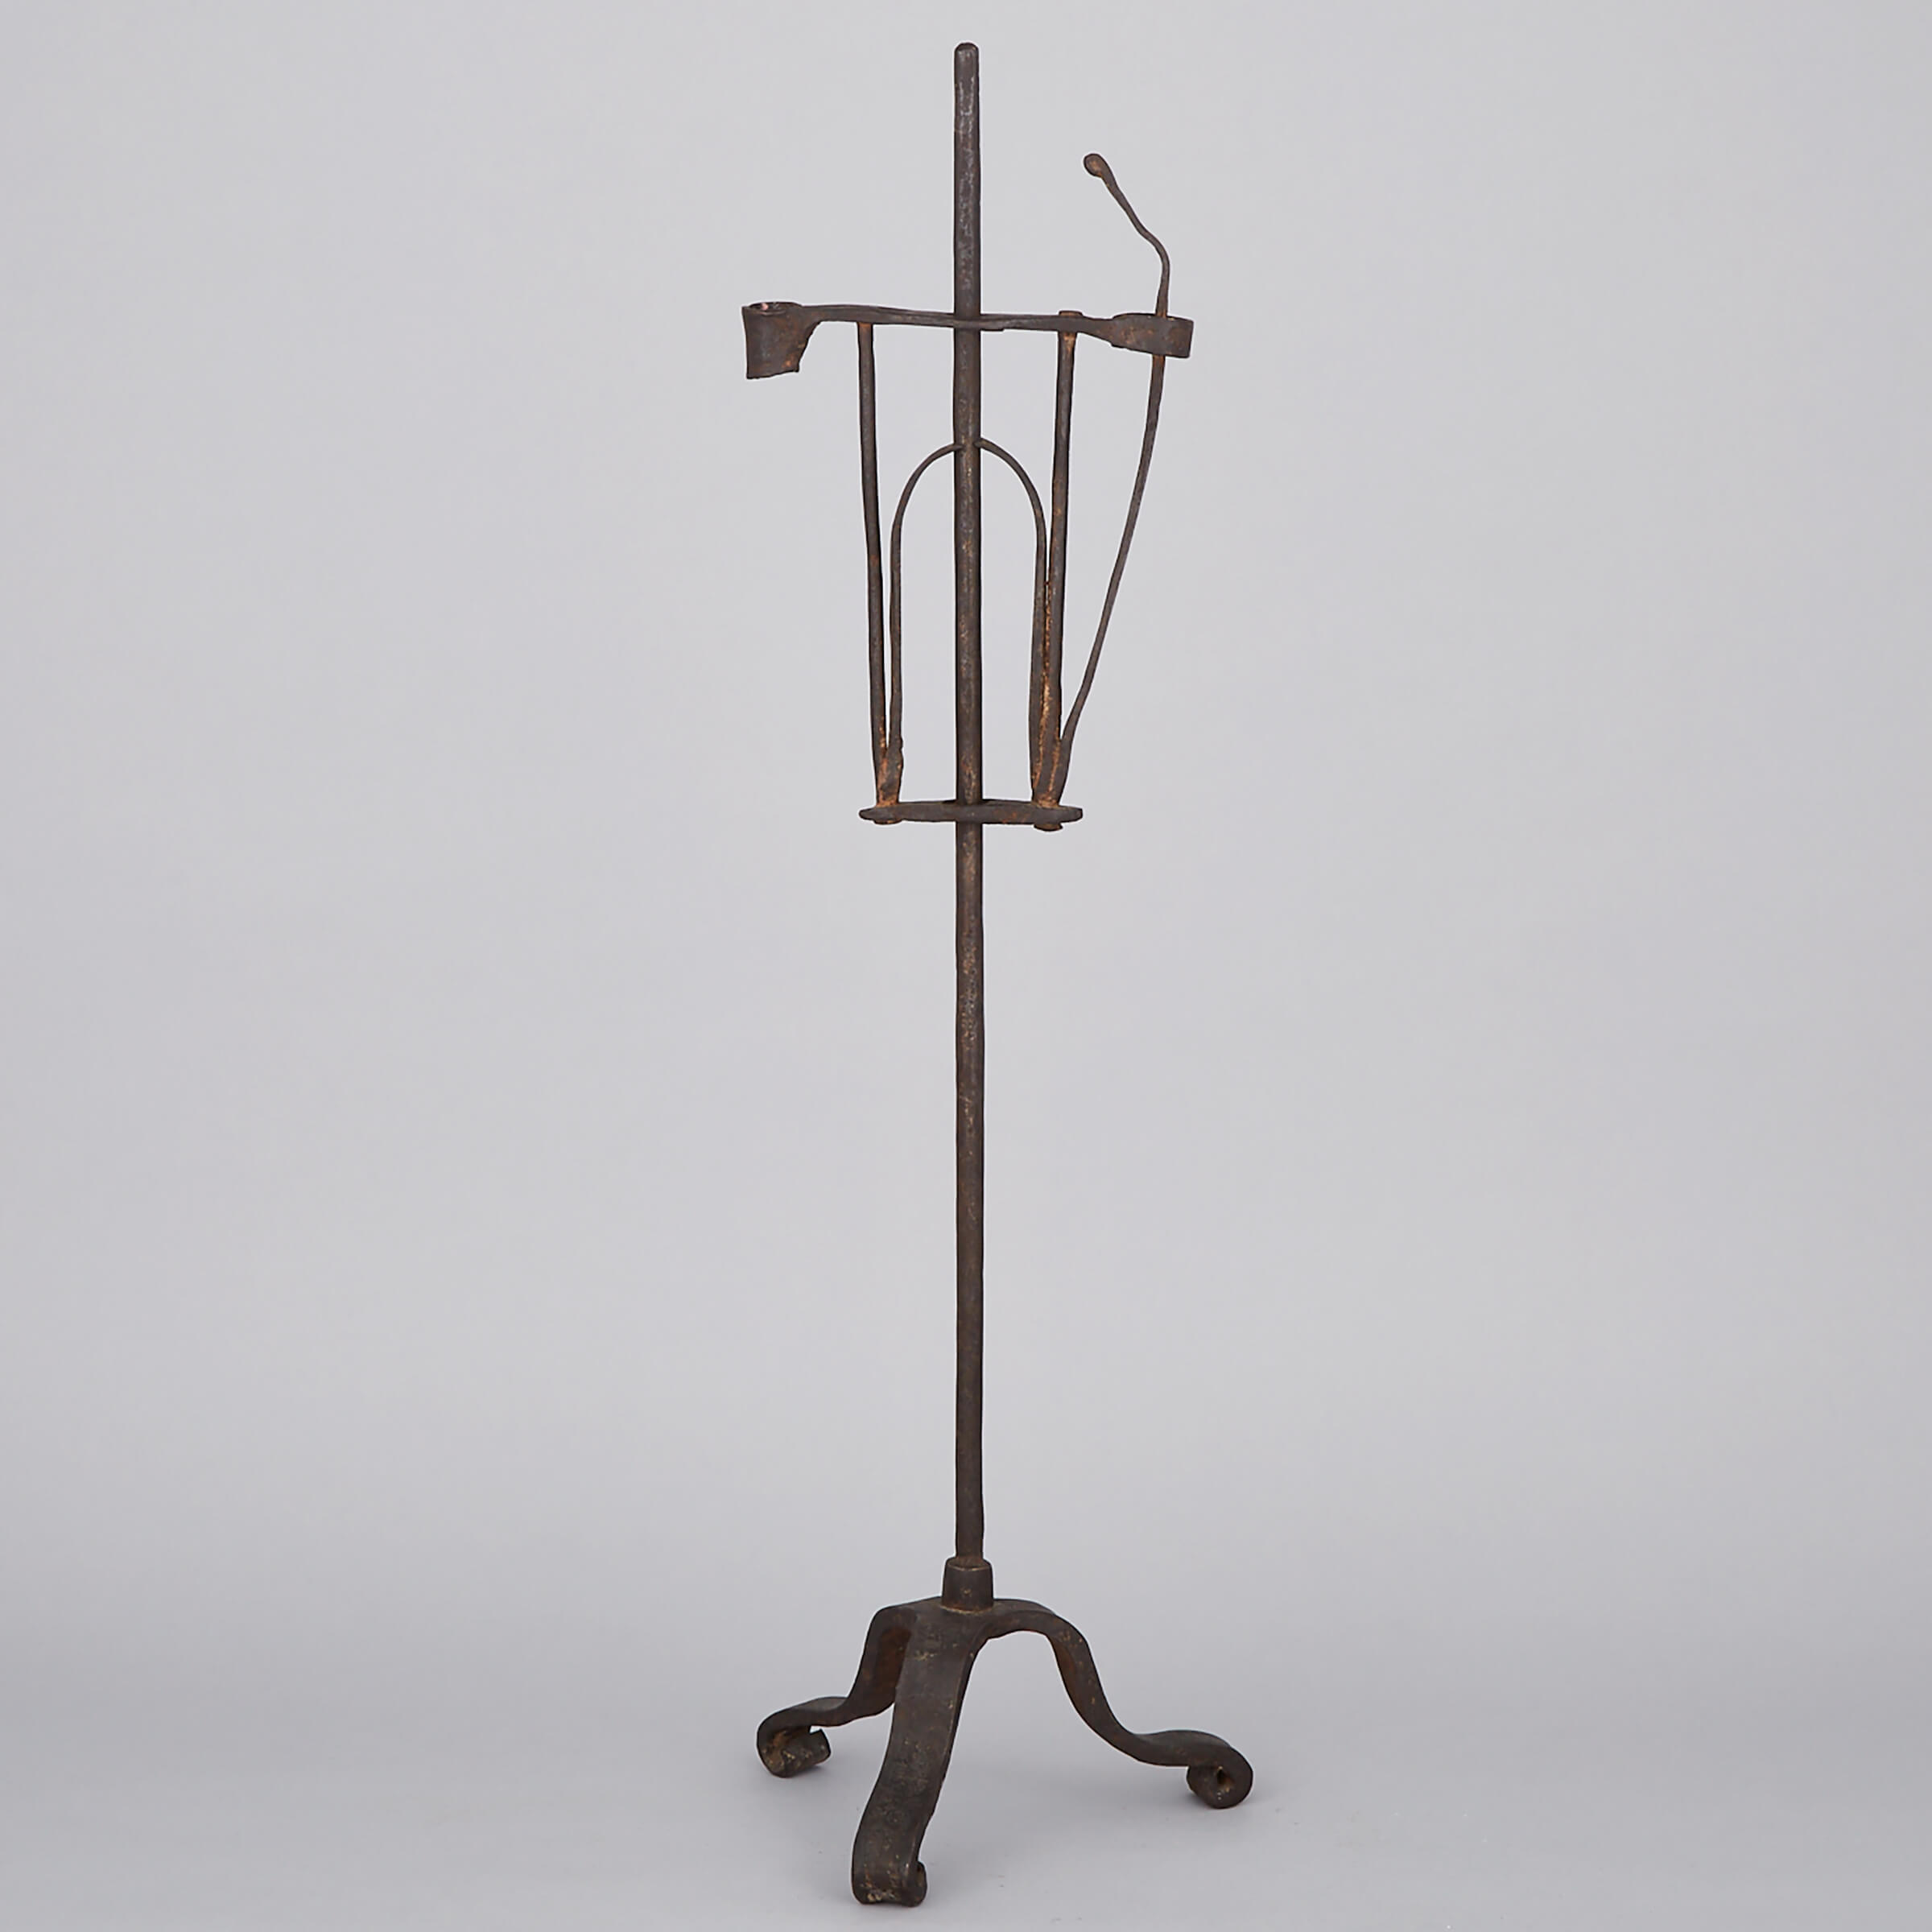 English Wrought Iron Floor Rushnip with Candle Holder, 18th century